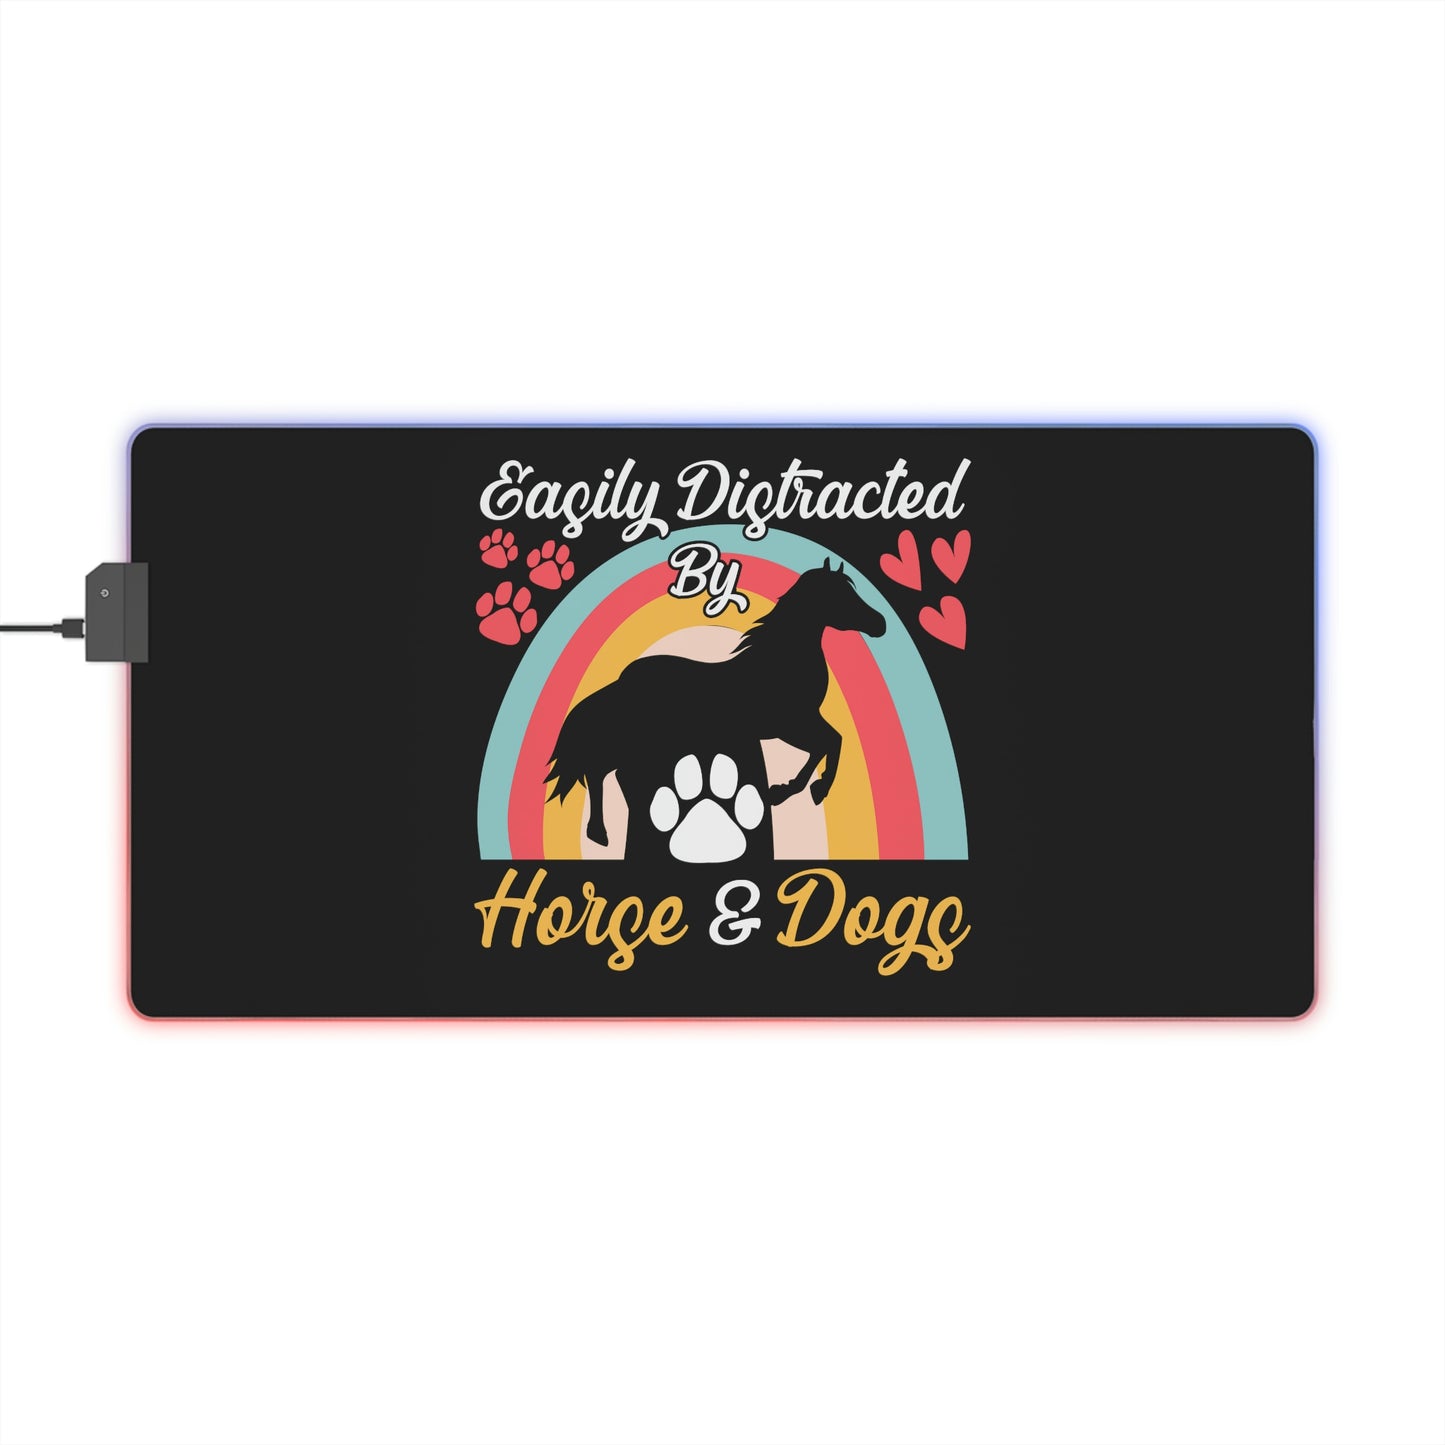 Easily Distracted by Horse and Dogs LED Gaming Mouse Pad